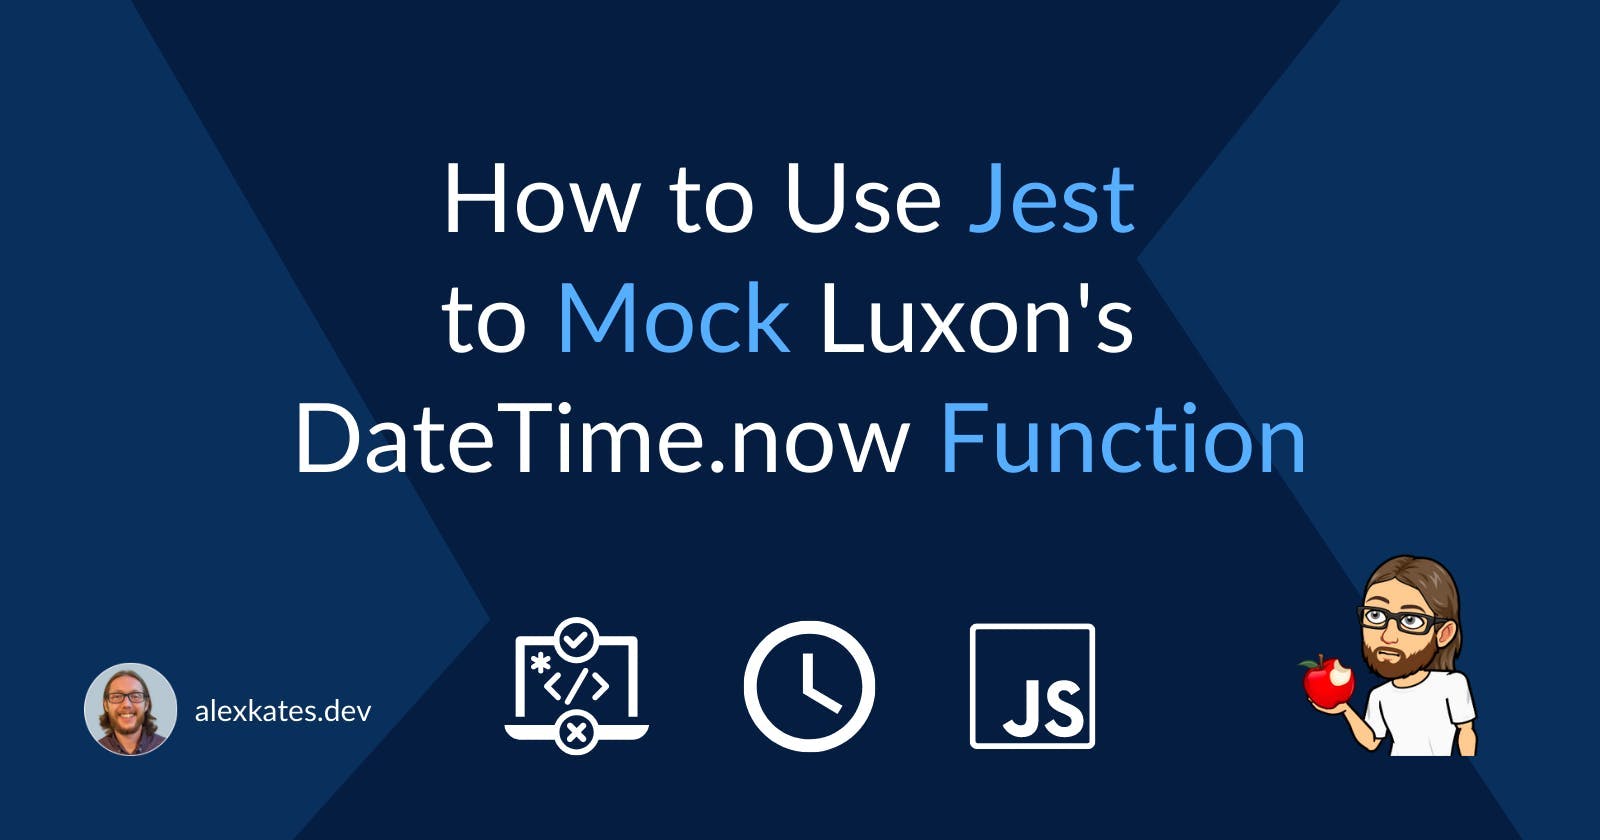 How to Use Jest to Mock Luxon's DateTime.now Function